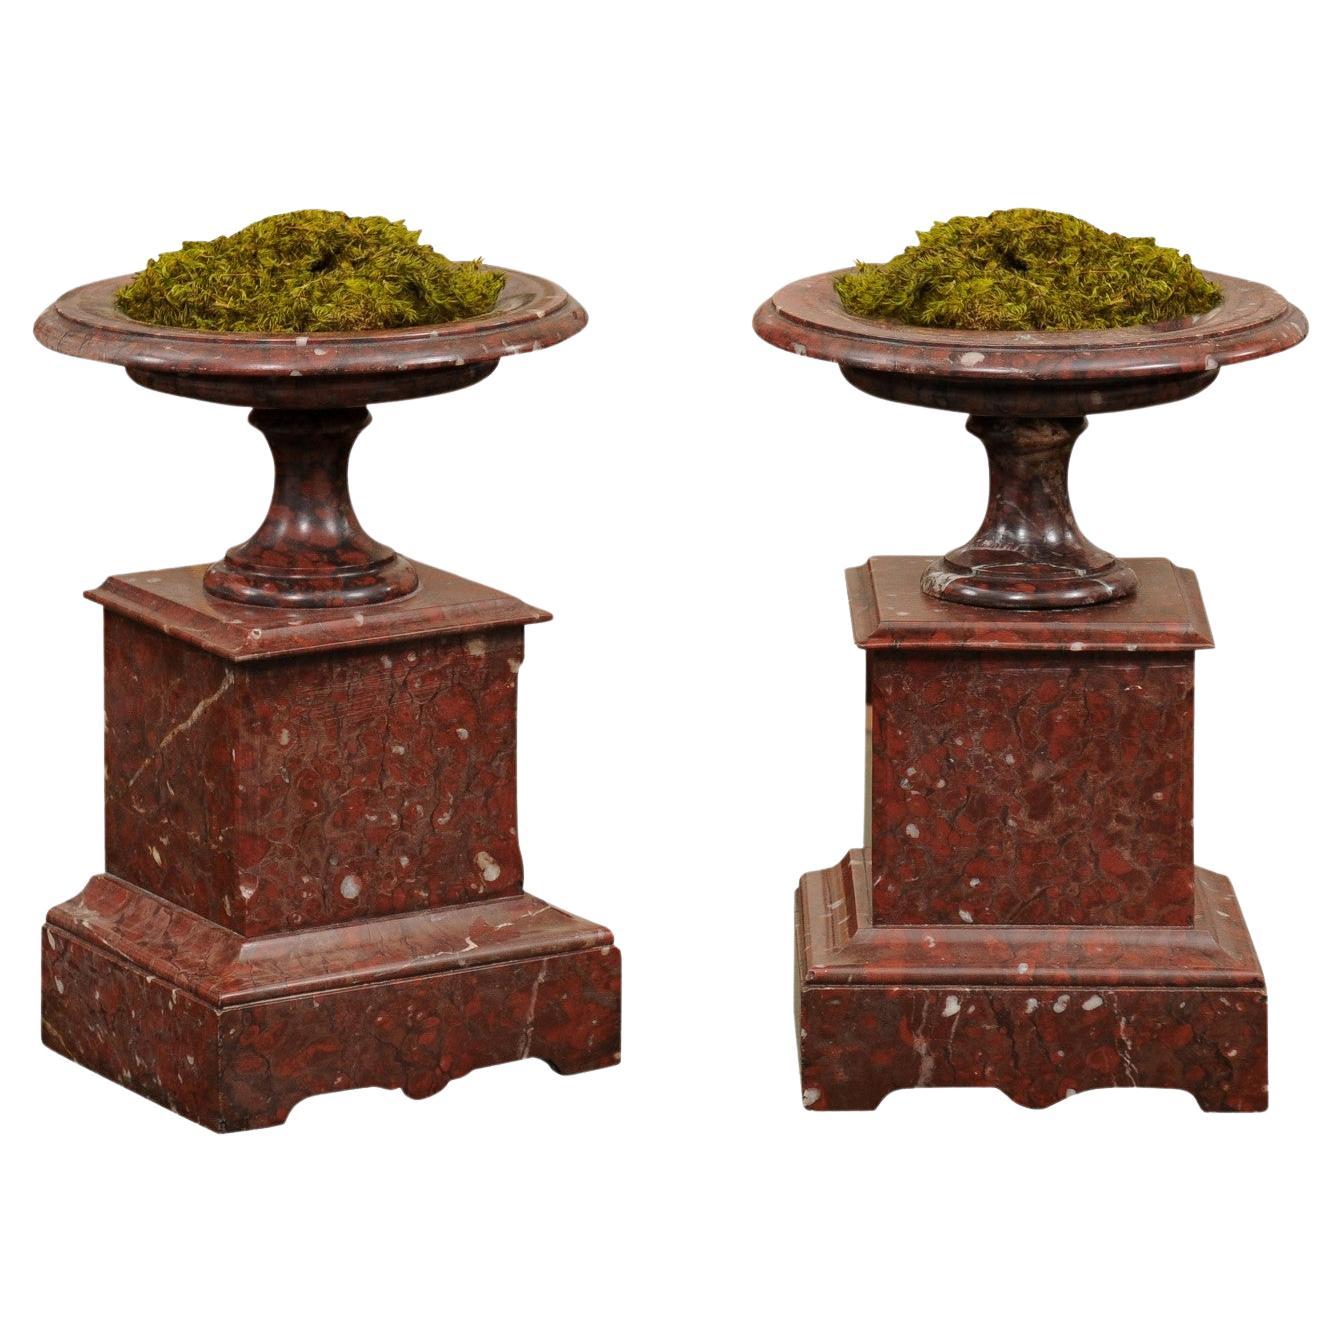 Pair of French Red Marble Tazzas / Coupes, ca. 1890